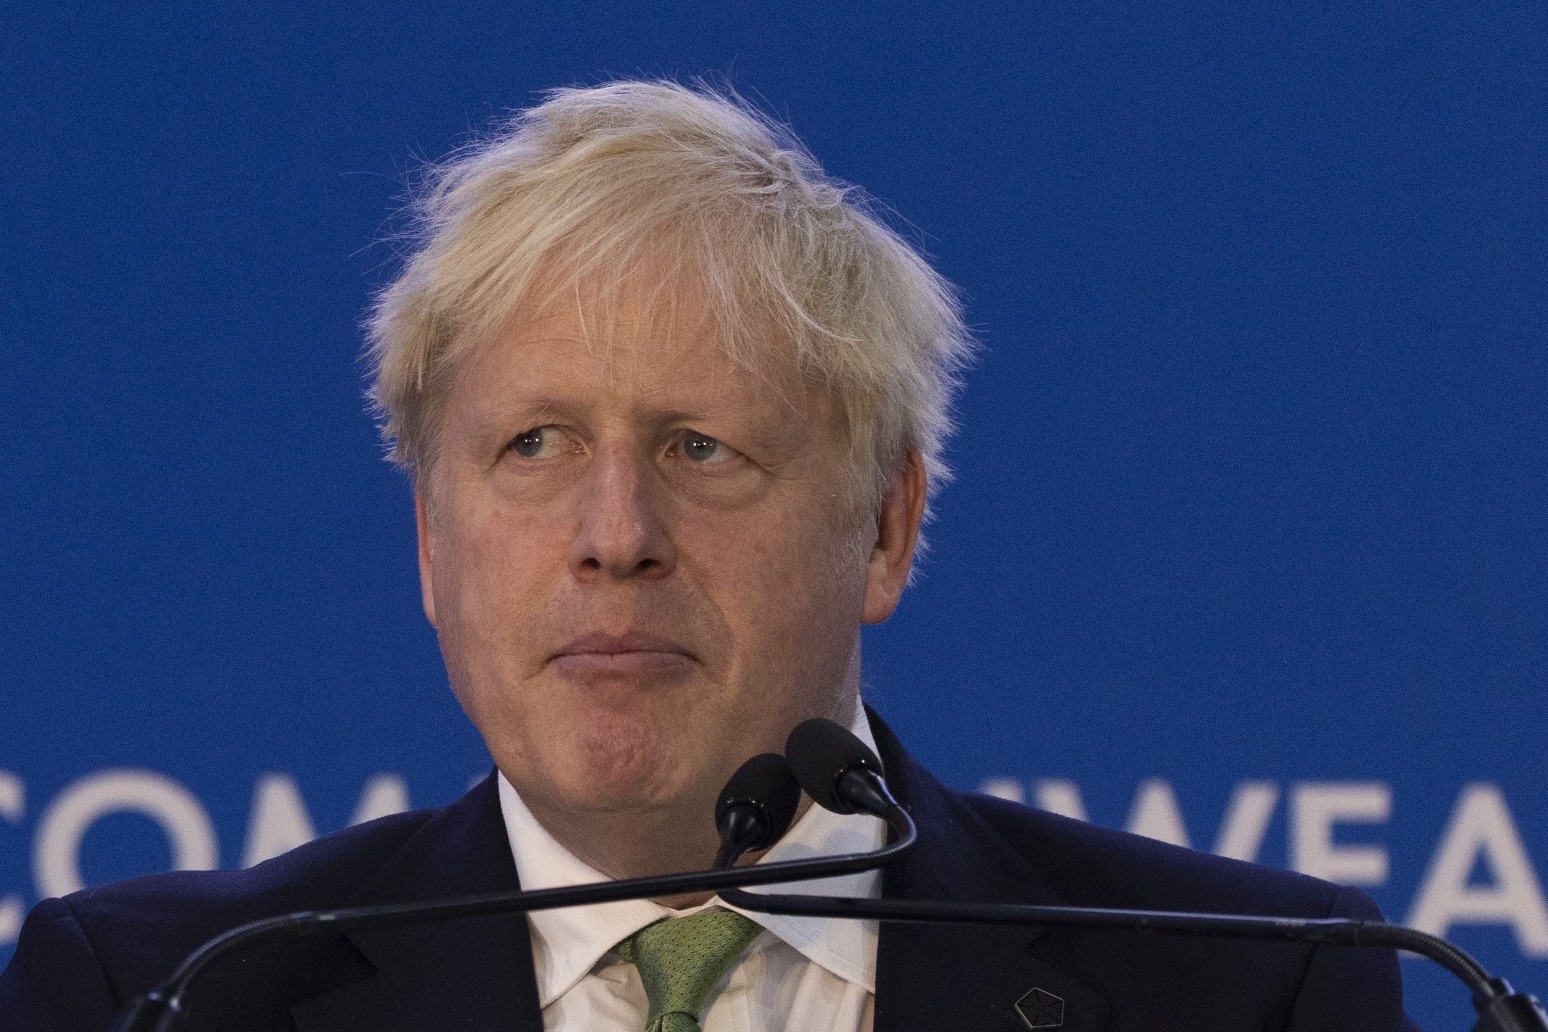 Johnson vows to keep going after double by election humiliation